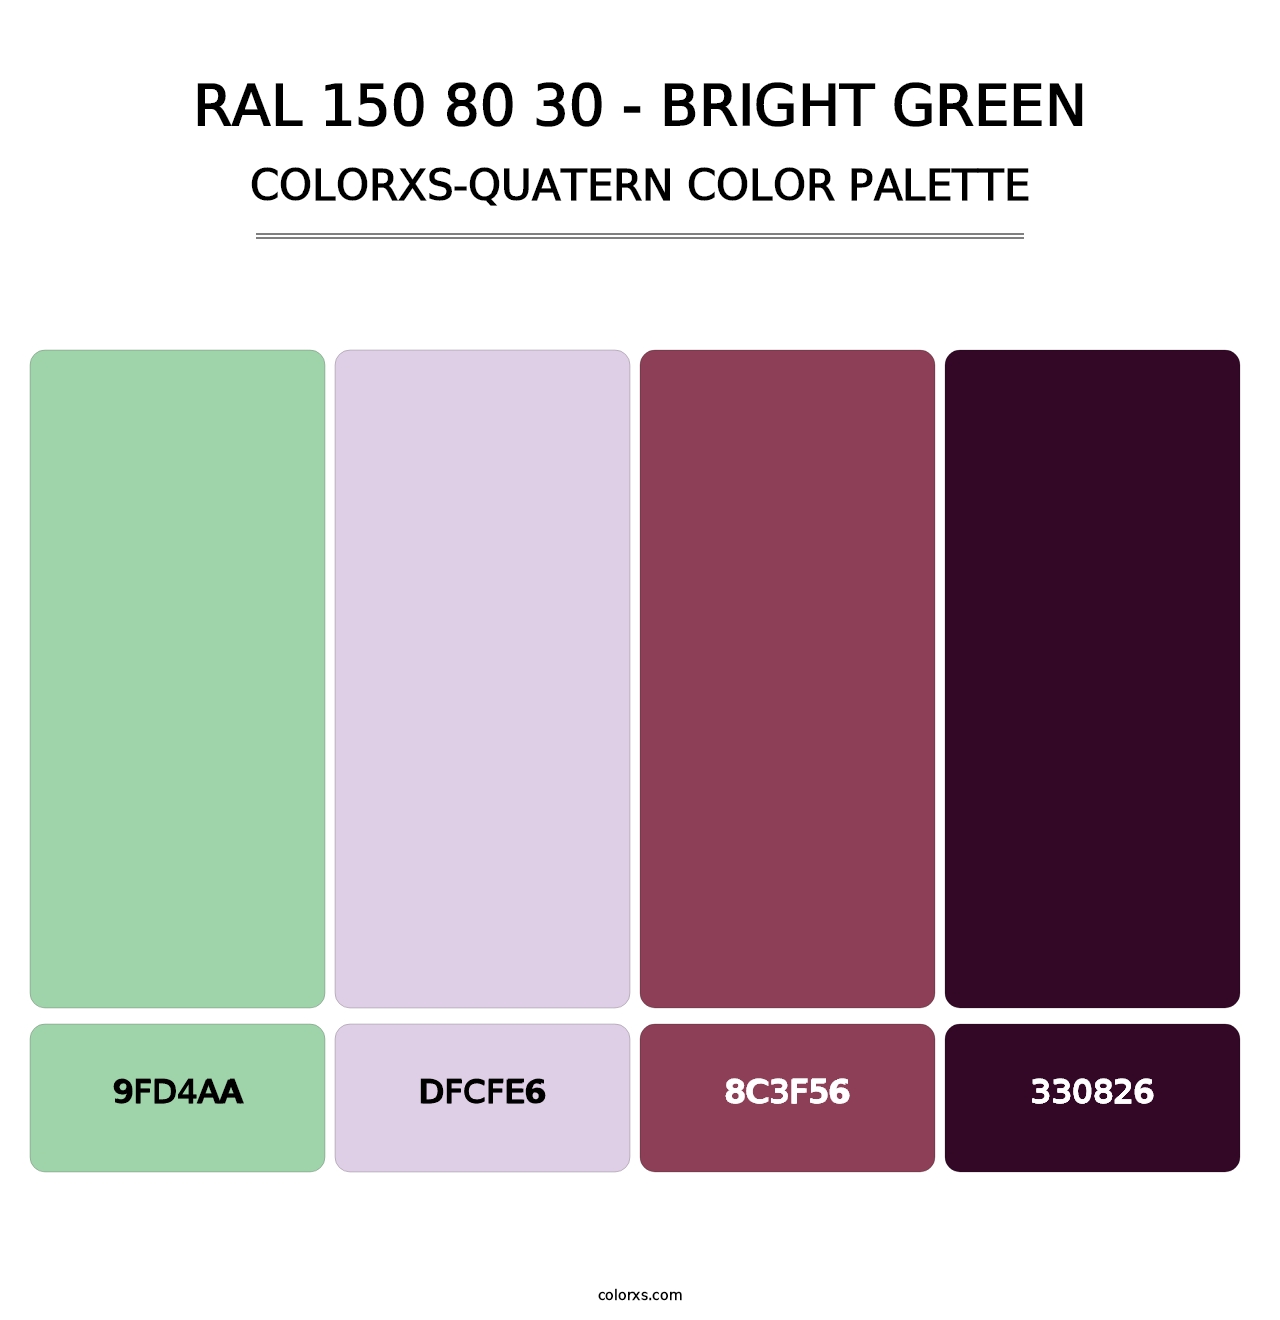 RAL 150 80 30 - Bright Green - Colorxs Quatern Palette